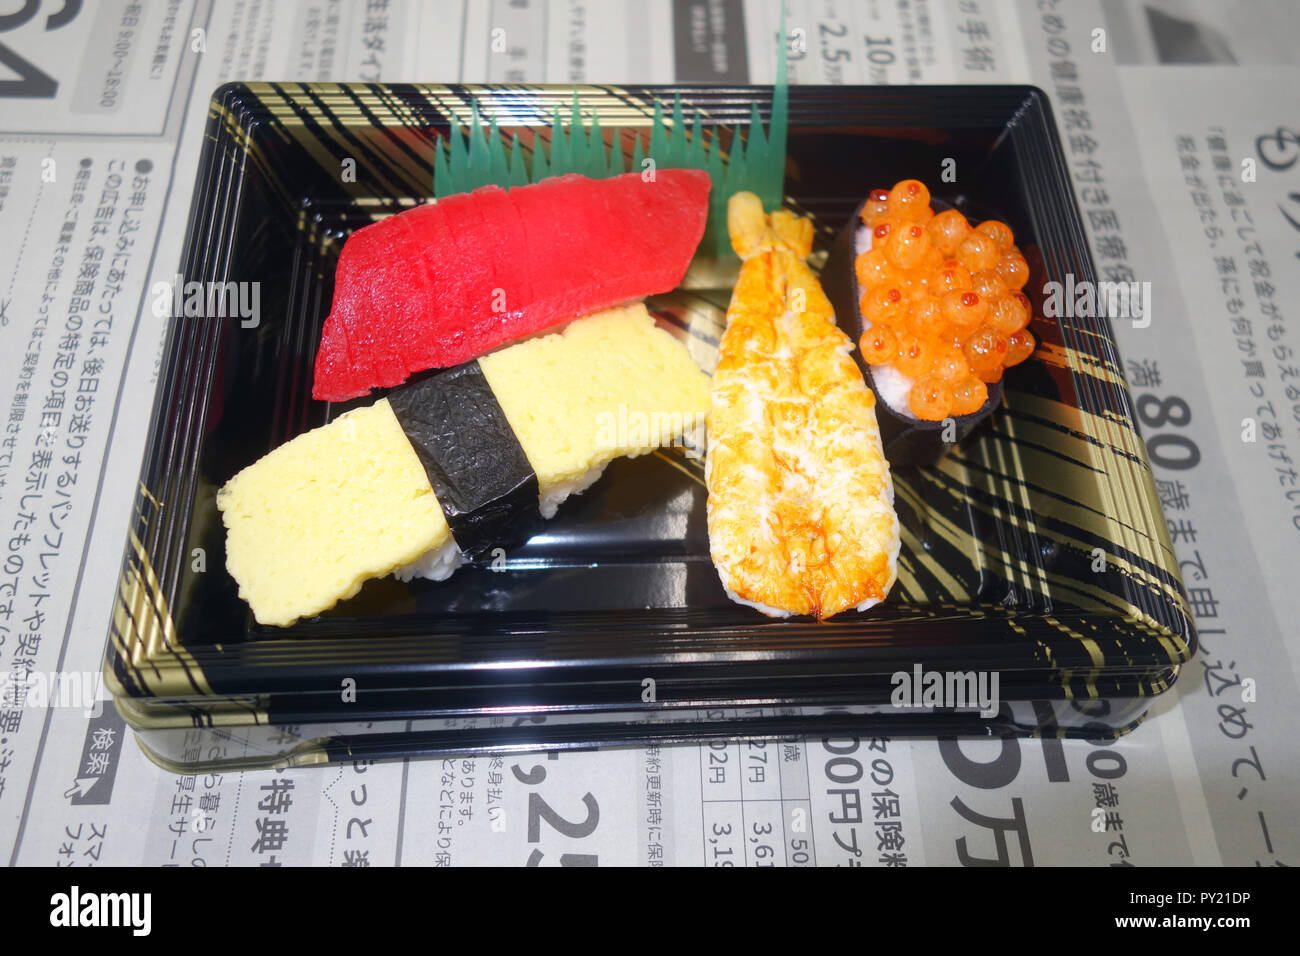 Fake food (sampuru) that has just been made in a class, Taito, Tokyo, Japan Stock Photo